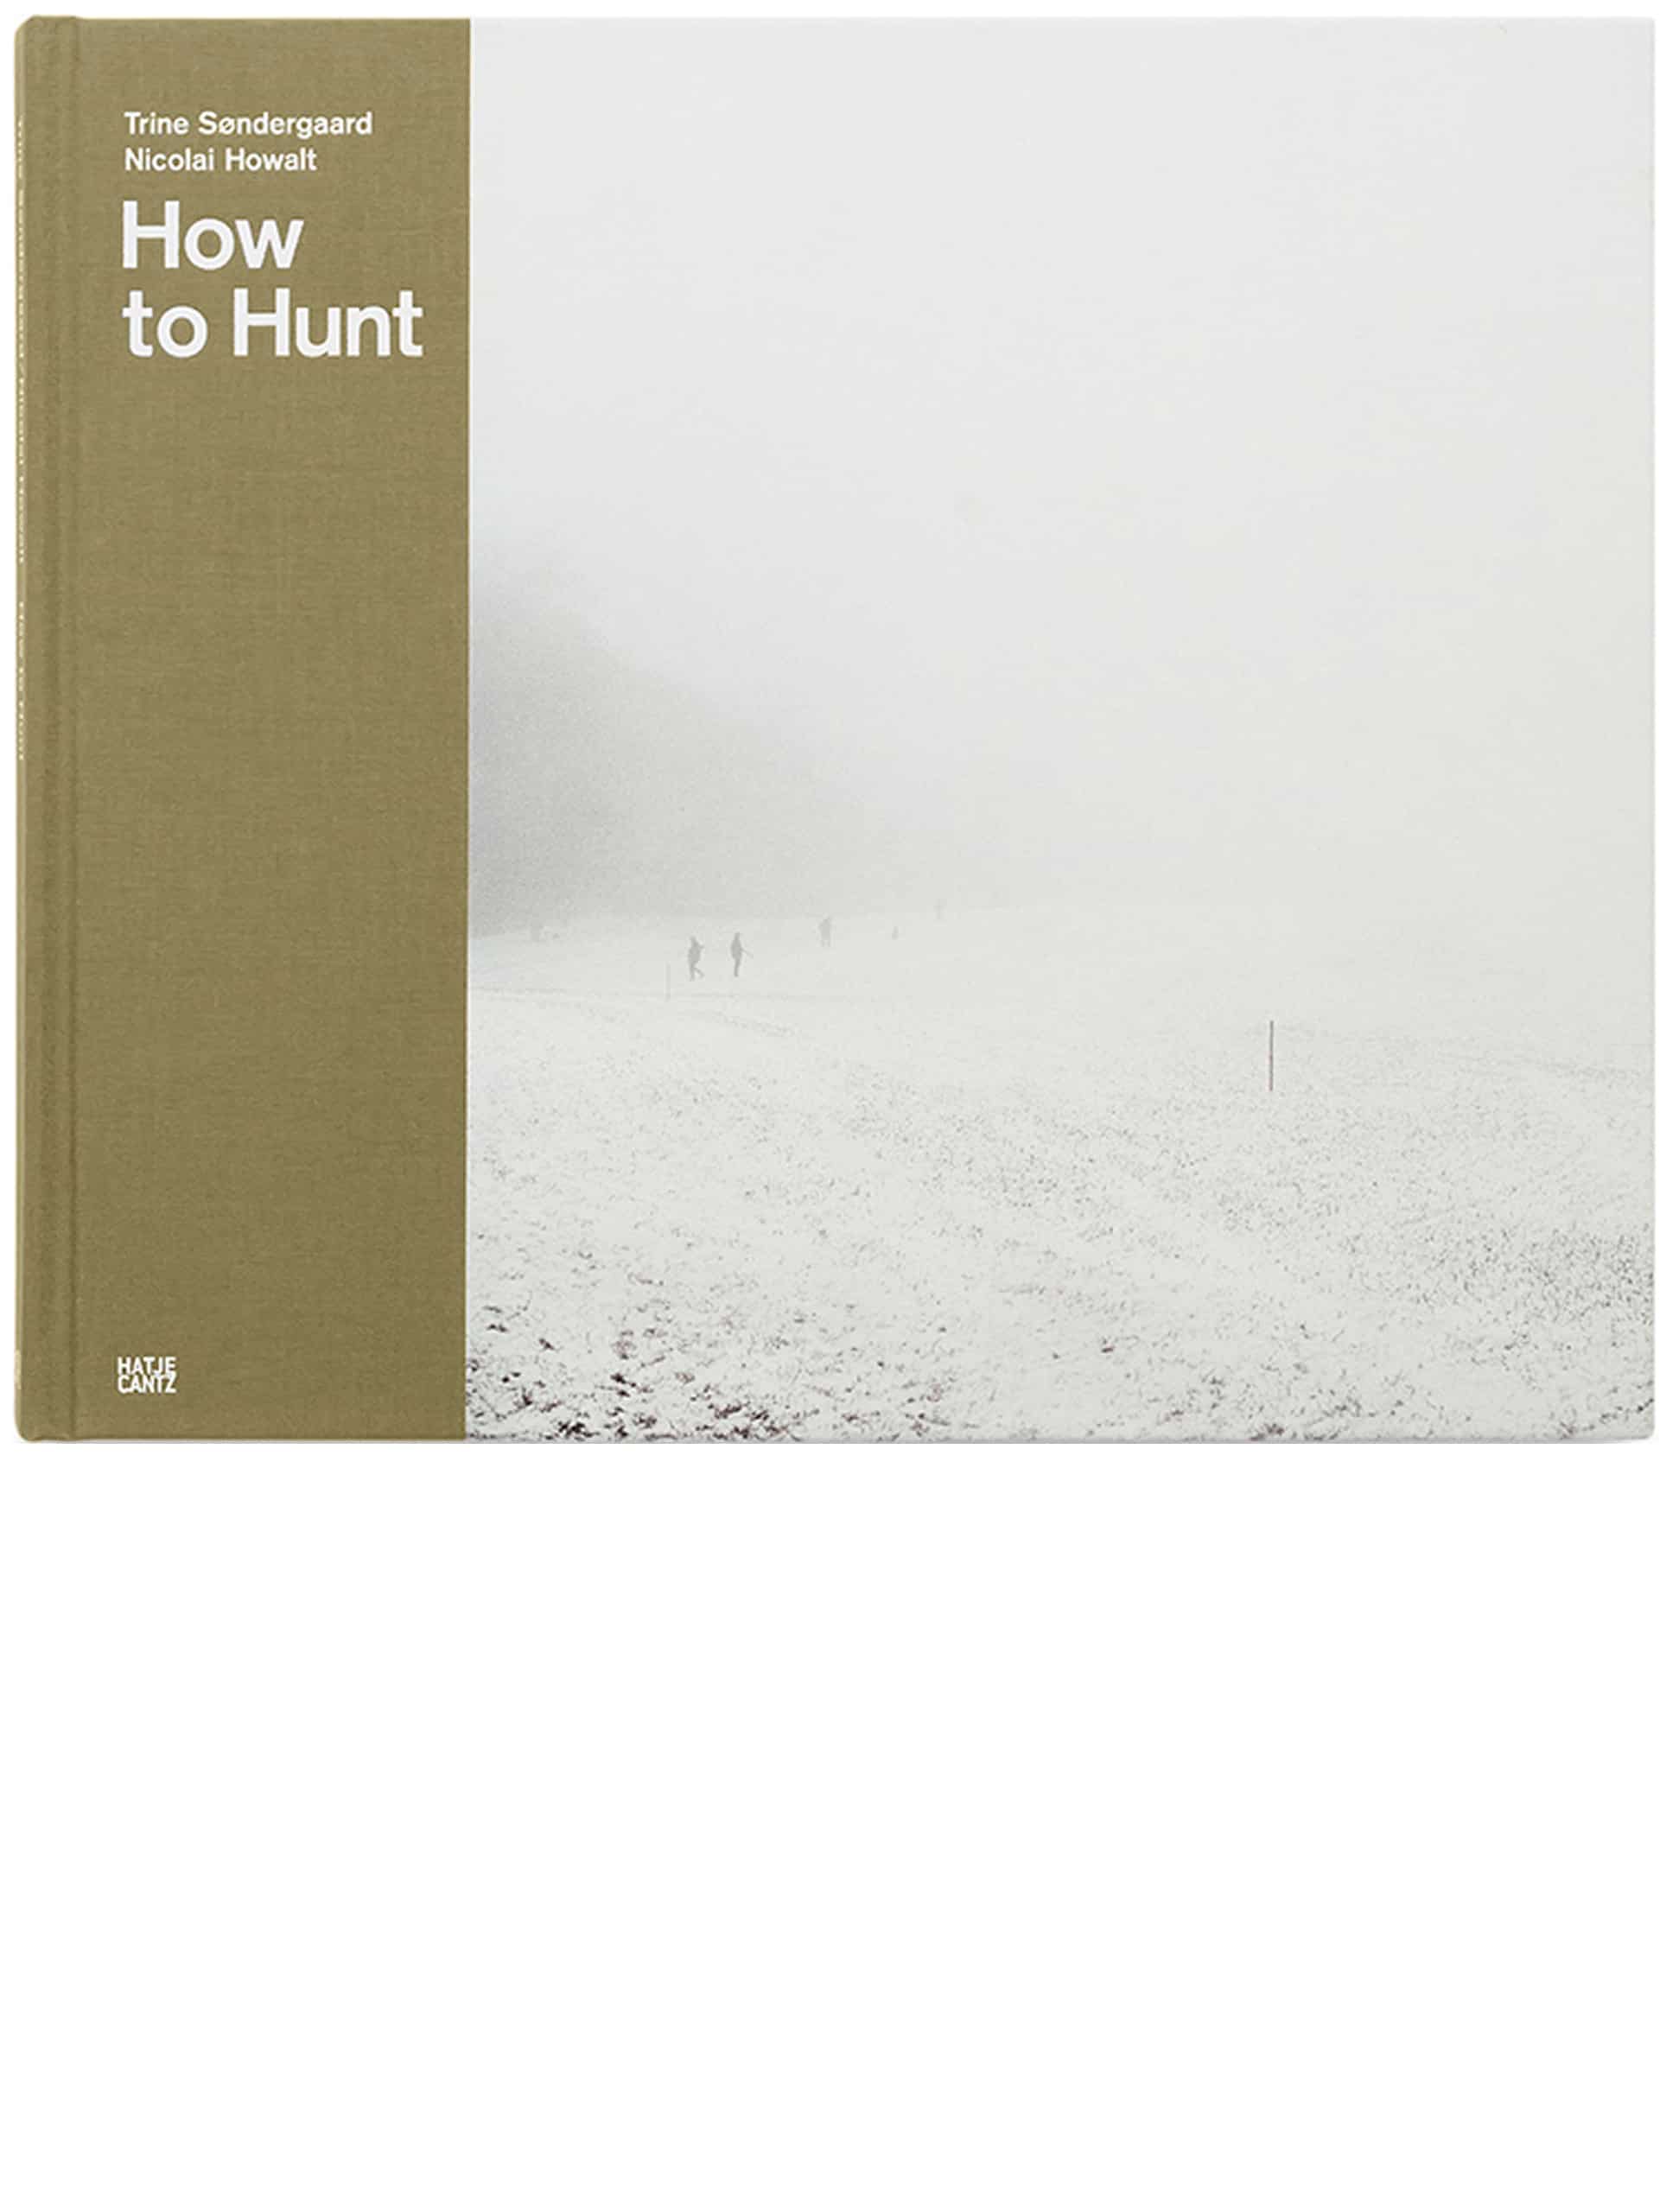 Front cover og the book How to Hunt by Trine Søndergaard and Nicolai Howalt